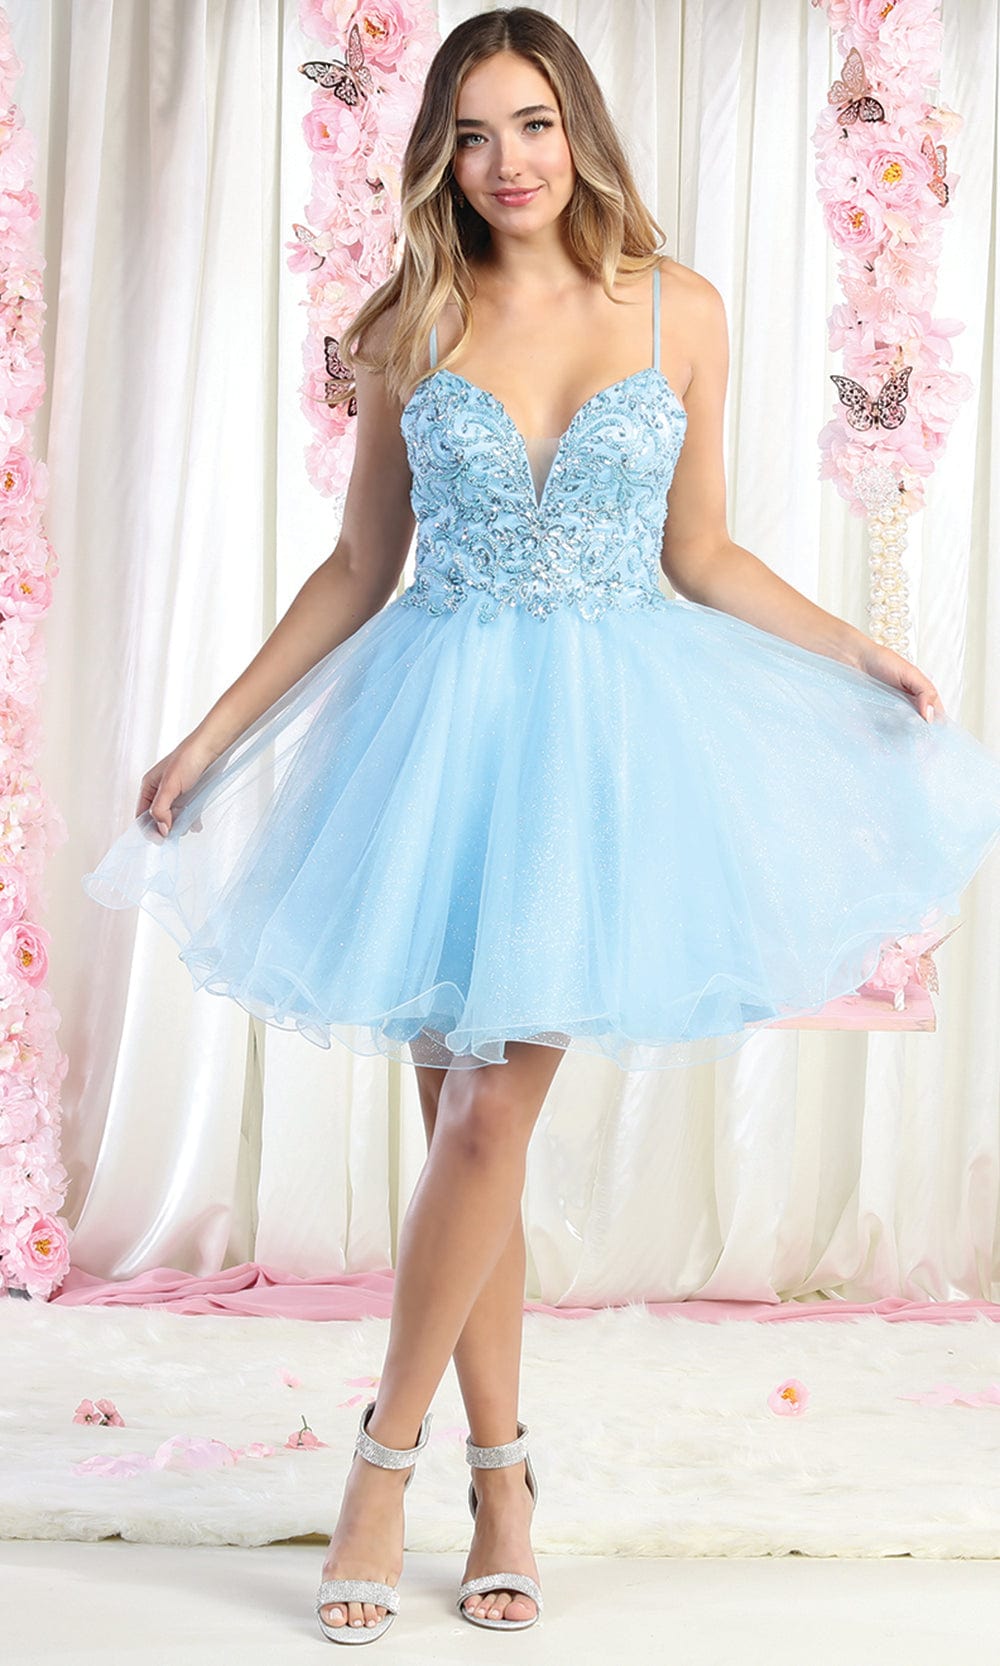 May Queen MQ1888 - Beaded Bodice Cocktail Dress Special Occasion Dress 2 / Baby Blue